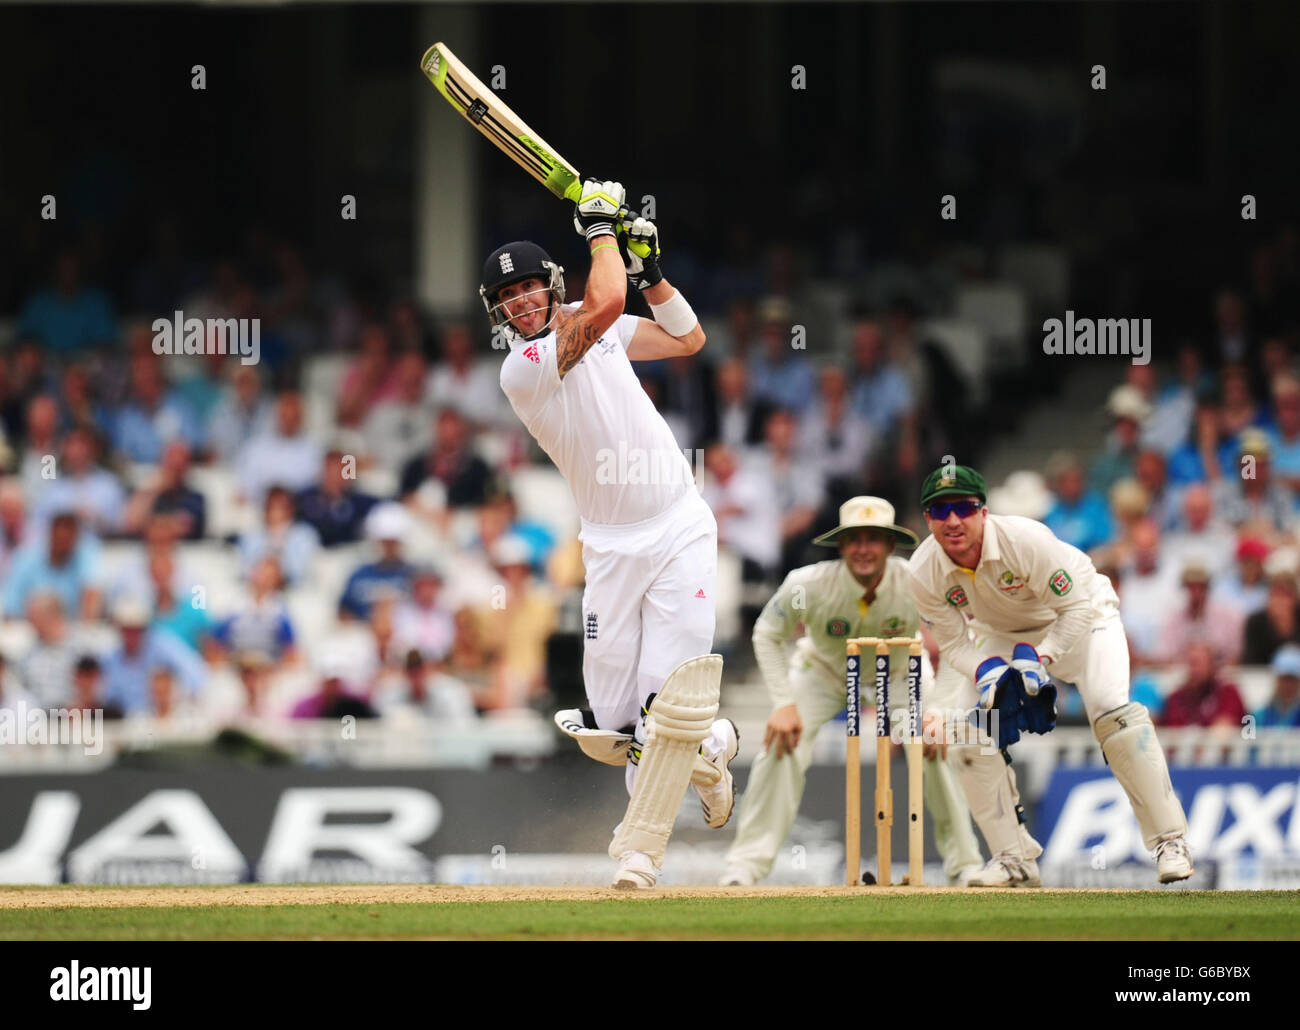 Cricket - Fifth Investec Ashes Test - Day Three - England v Australia - The Kia Oval. England's Kevin Pietersen hits out for four runs during day three of the Fifth Investec Ashes Test match at The Kia Oval, London. Stock Photo